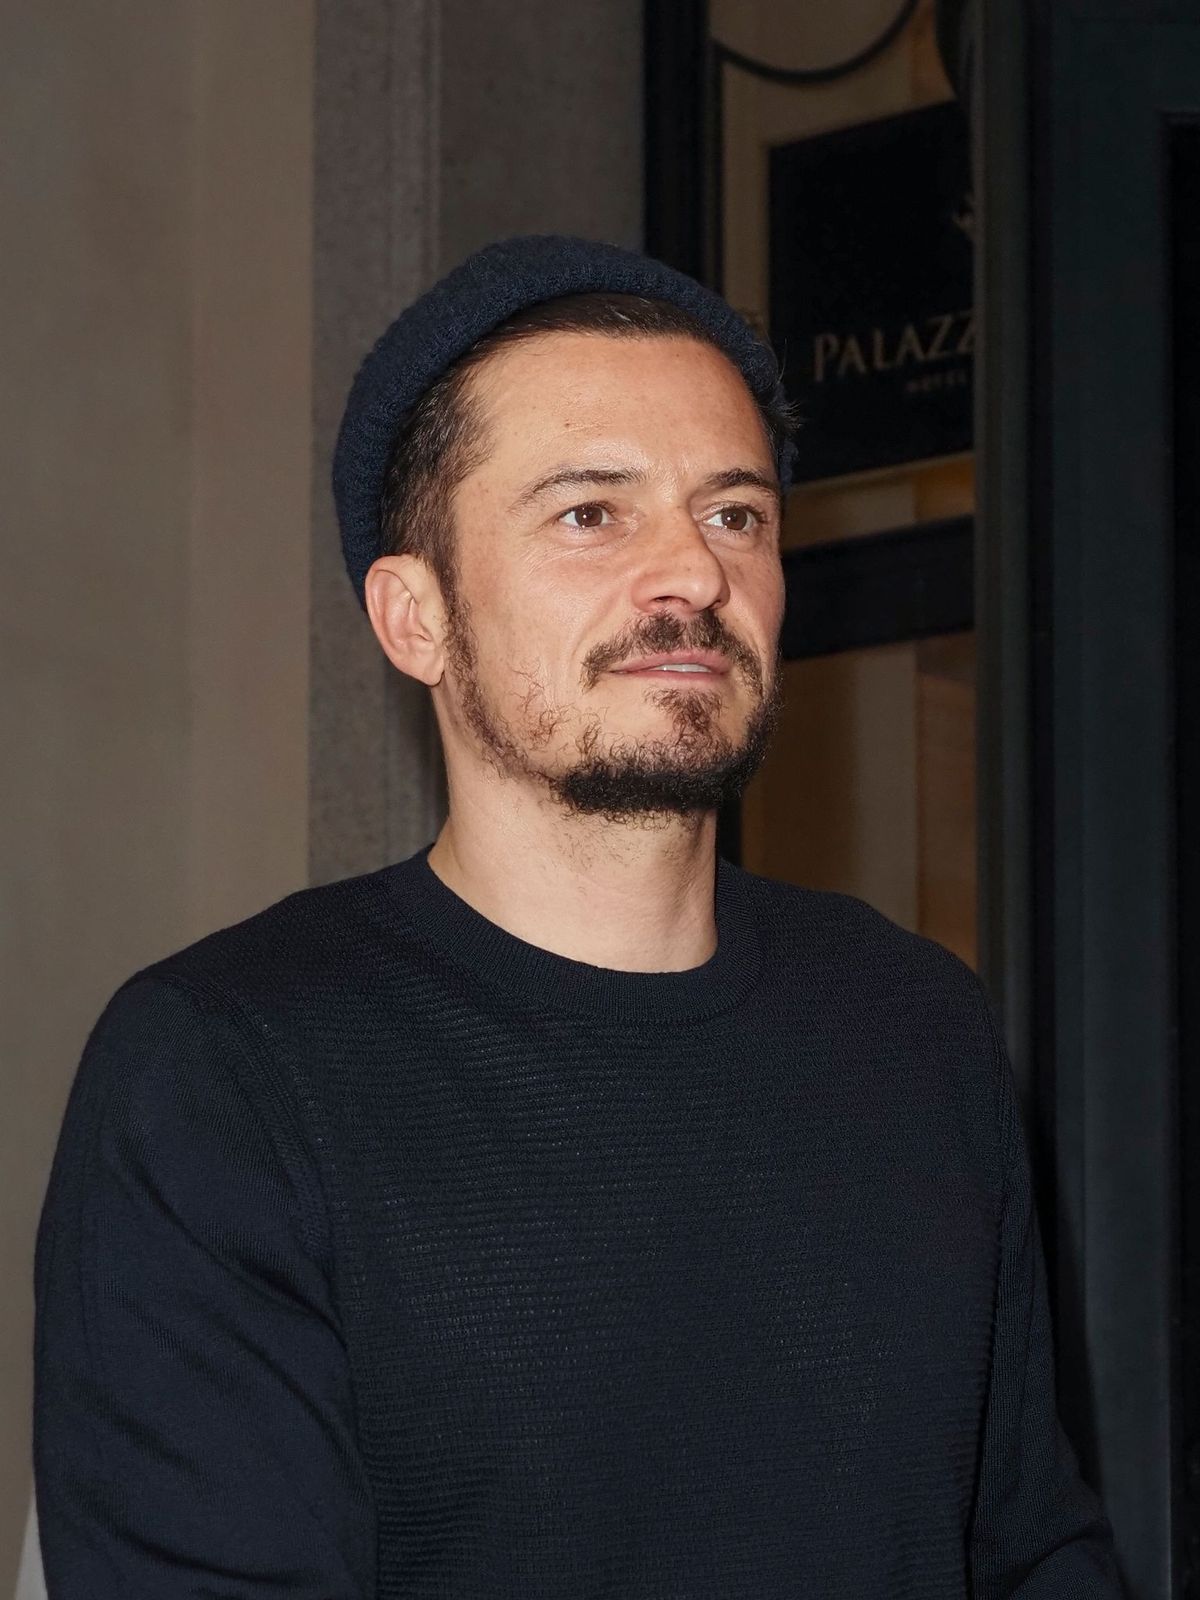 Orlando Bloom at Milan Fashion Week Fall/Winter 2020-2021 on February 22, 2020 in Italy | Photo: Arnold Jerocki/Getty Images